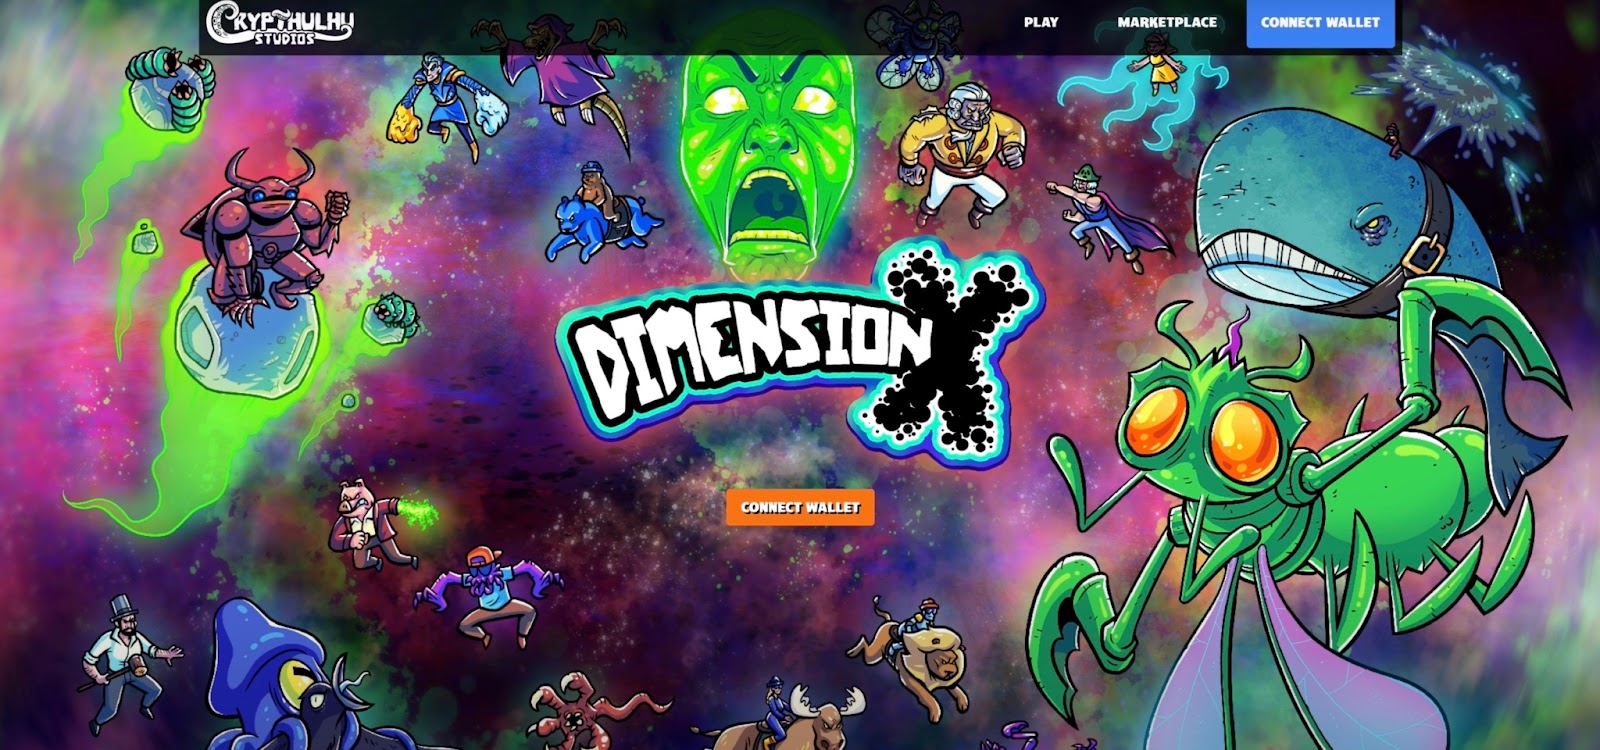 Logo of the game Dimension X on a background of space with various characters